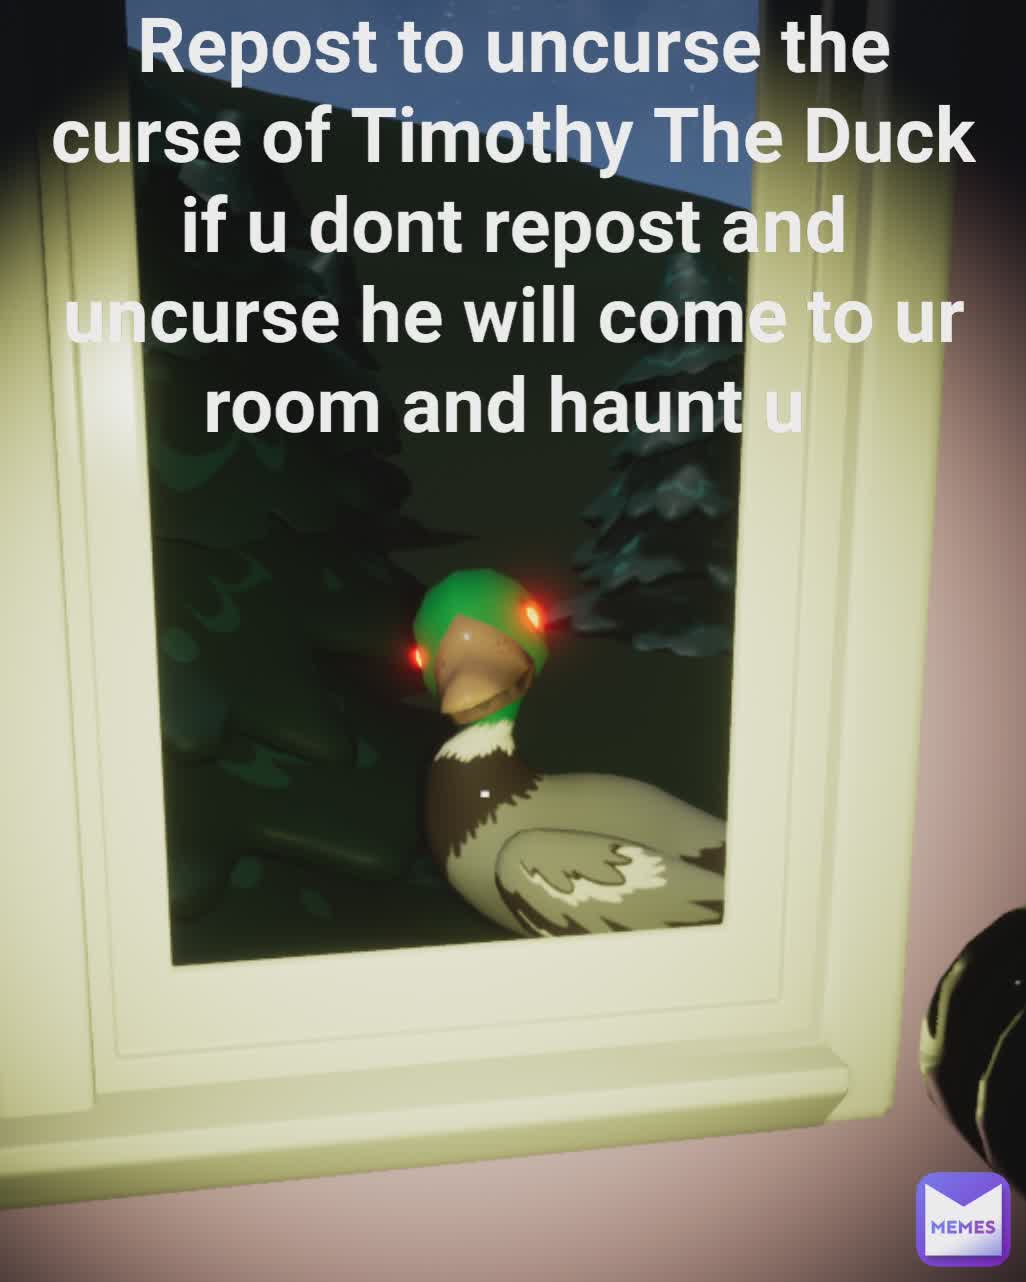 Type Text Repost to uncurse the curse of Timothy The Duck
if u dont repost and uncurse he will come to ur room and haunt u 